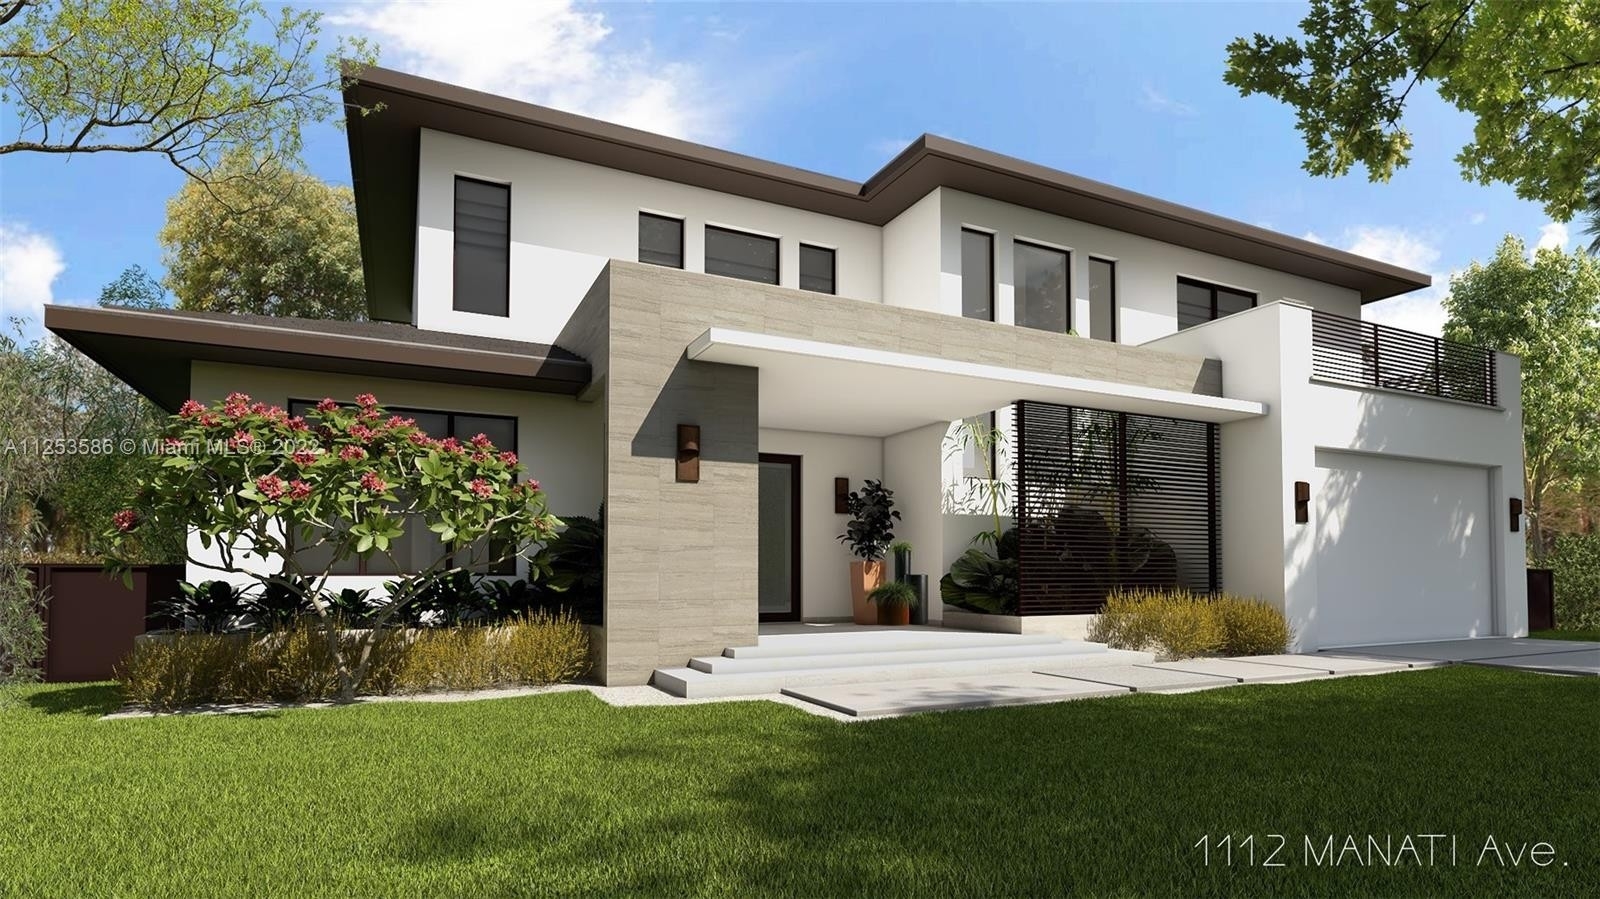 Single Family Home for Sale at Riviera, Coral Gables, FL 33146